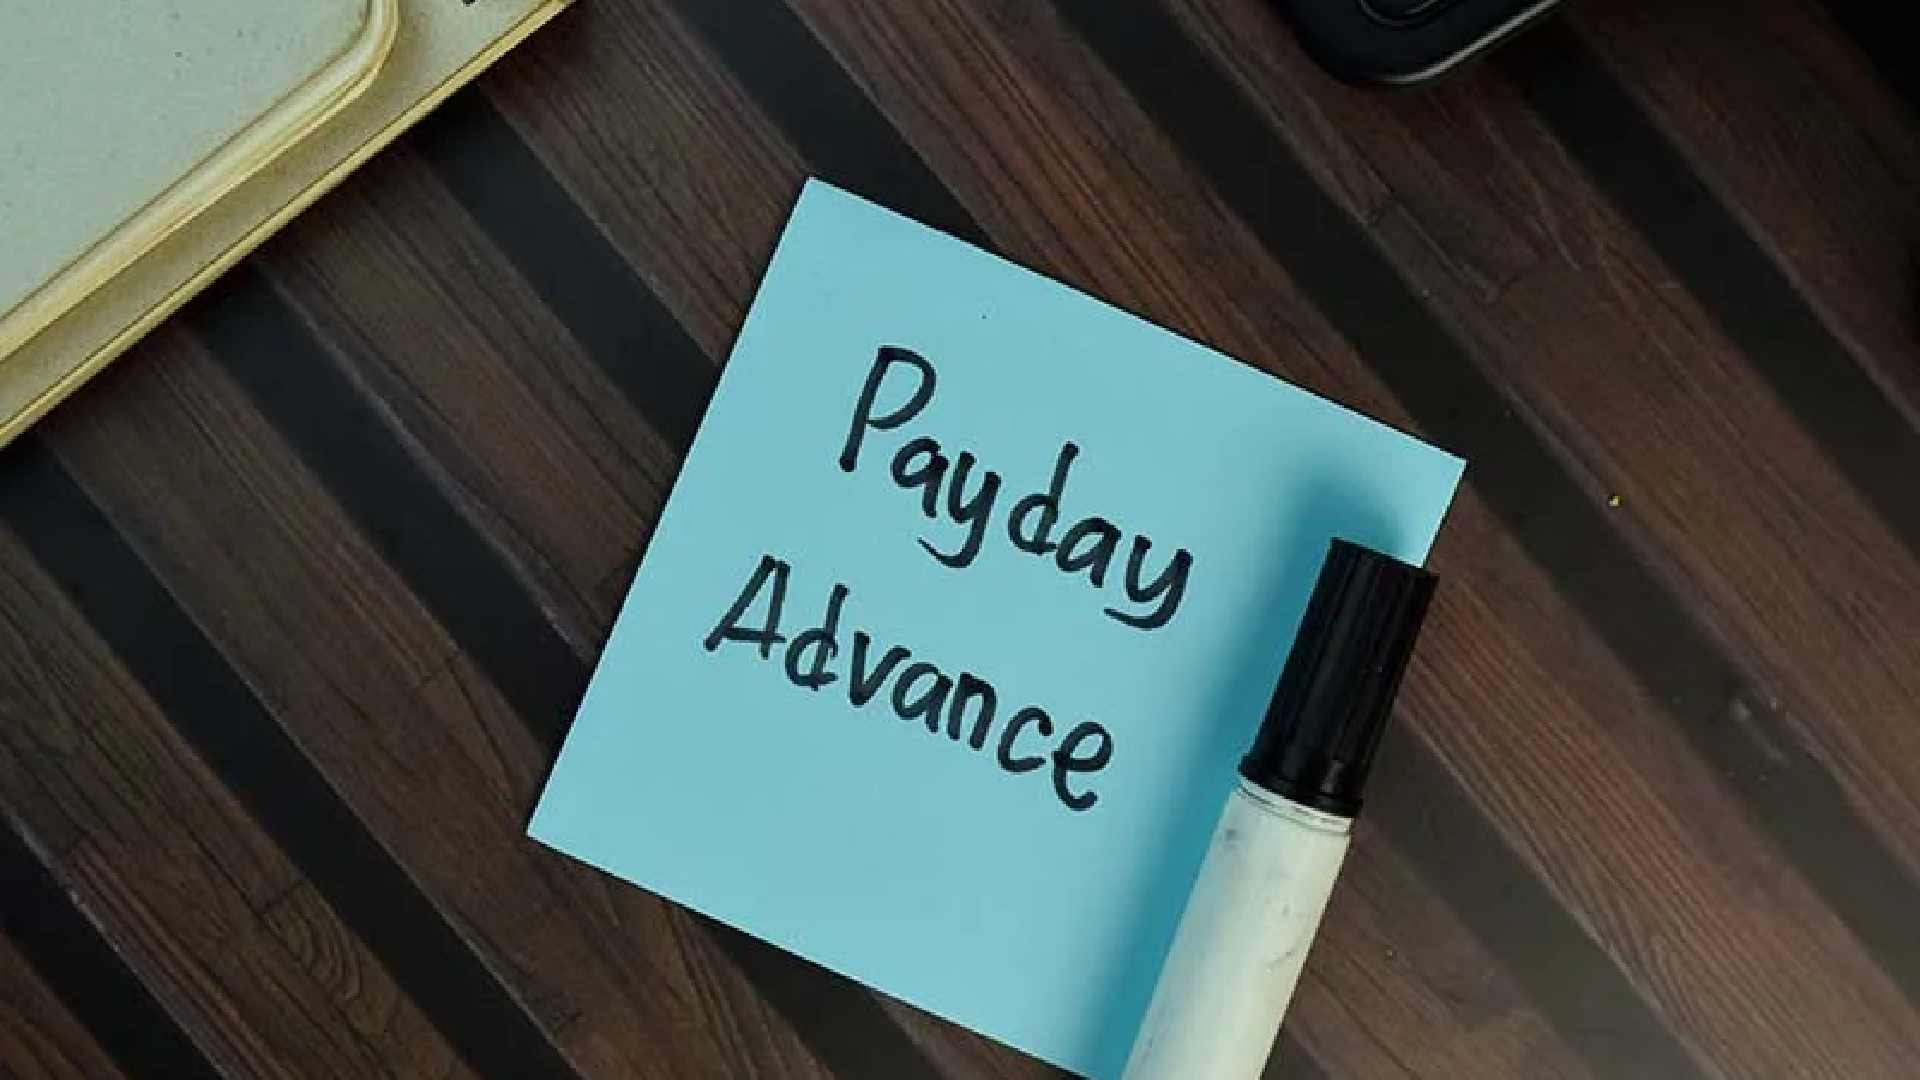 Application for advance salary